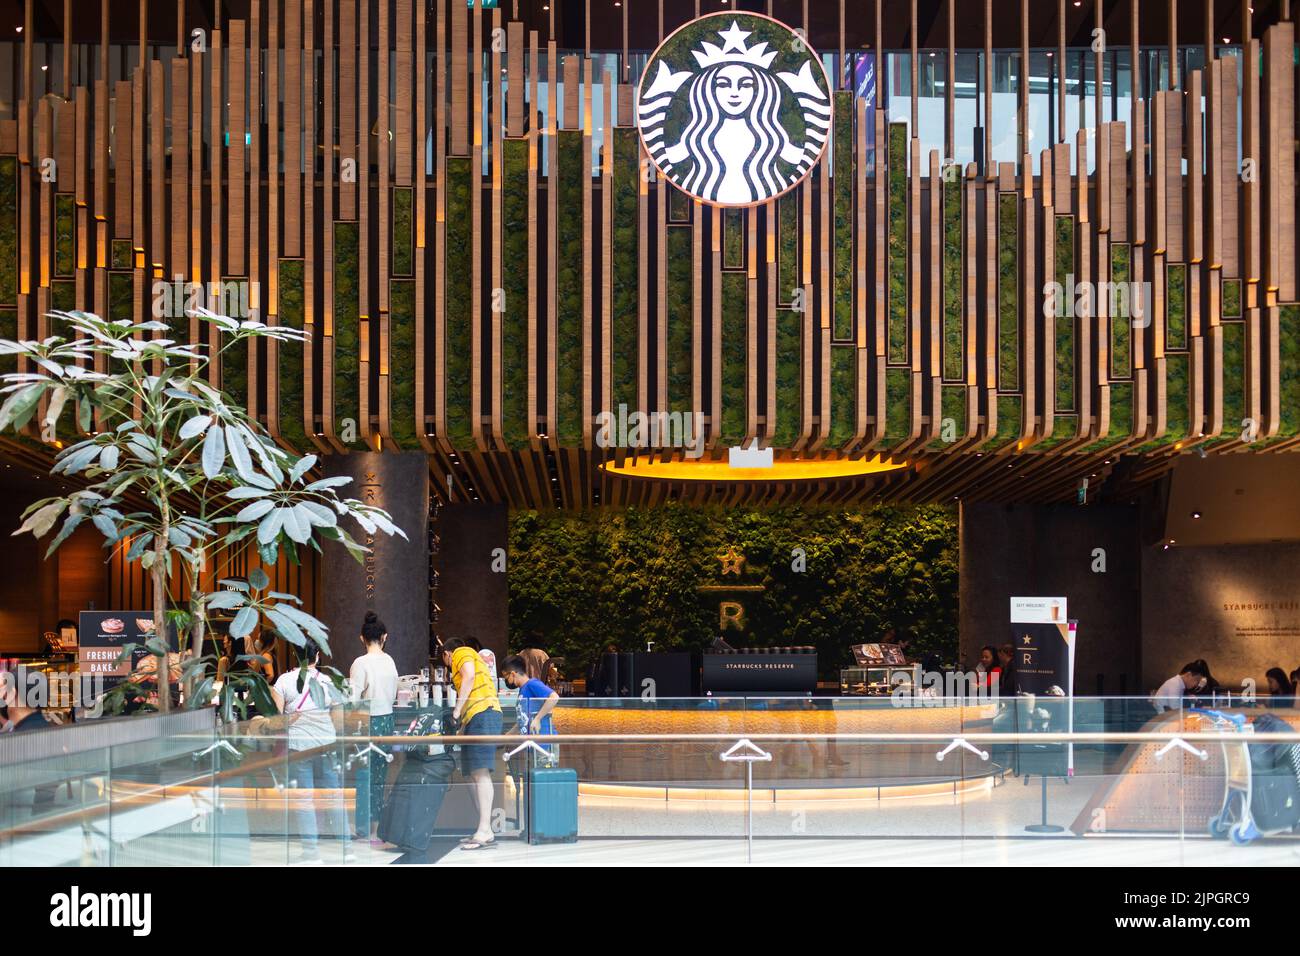 Ultra premium storefront The Starbucks Reserve, the place to elevate your coffee drinking experience. Jewel, Changi Airport, Singapore. Stock Photo